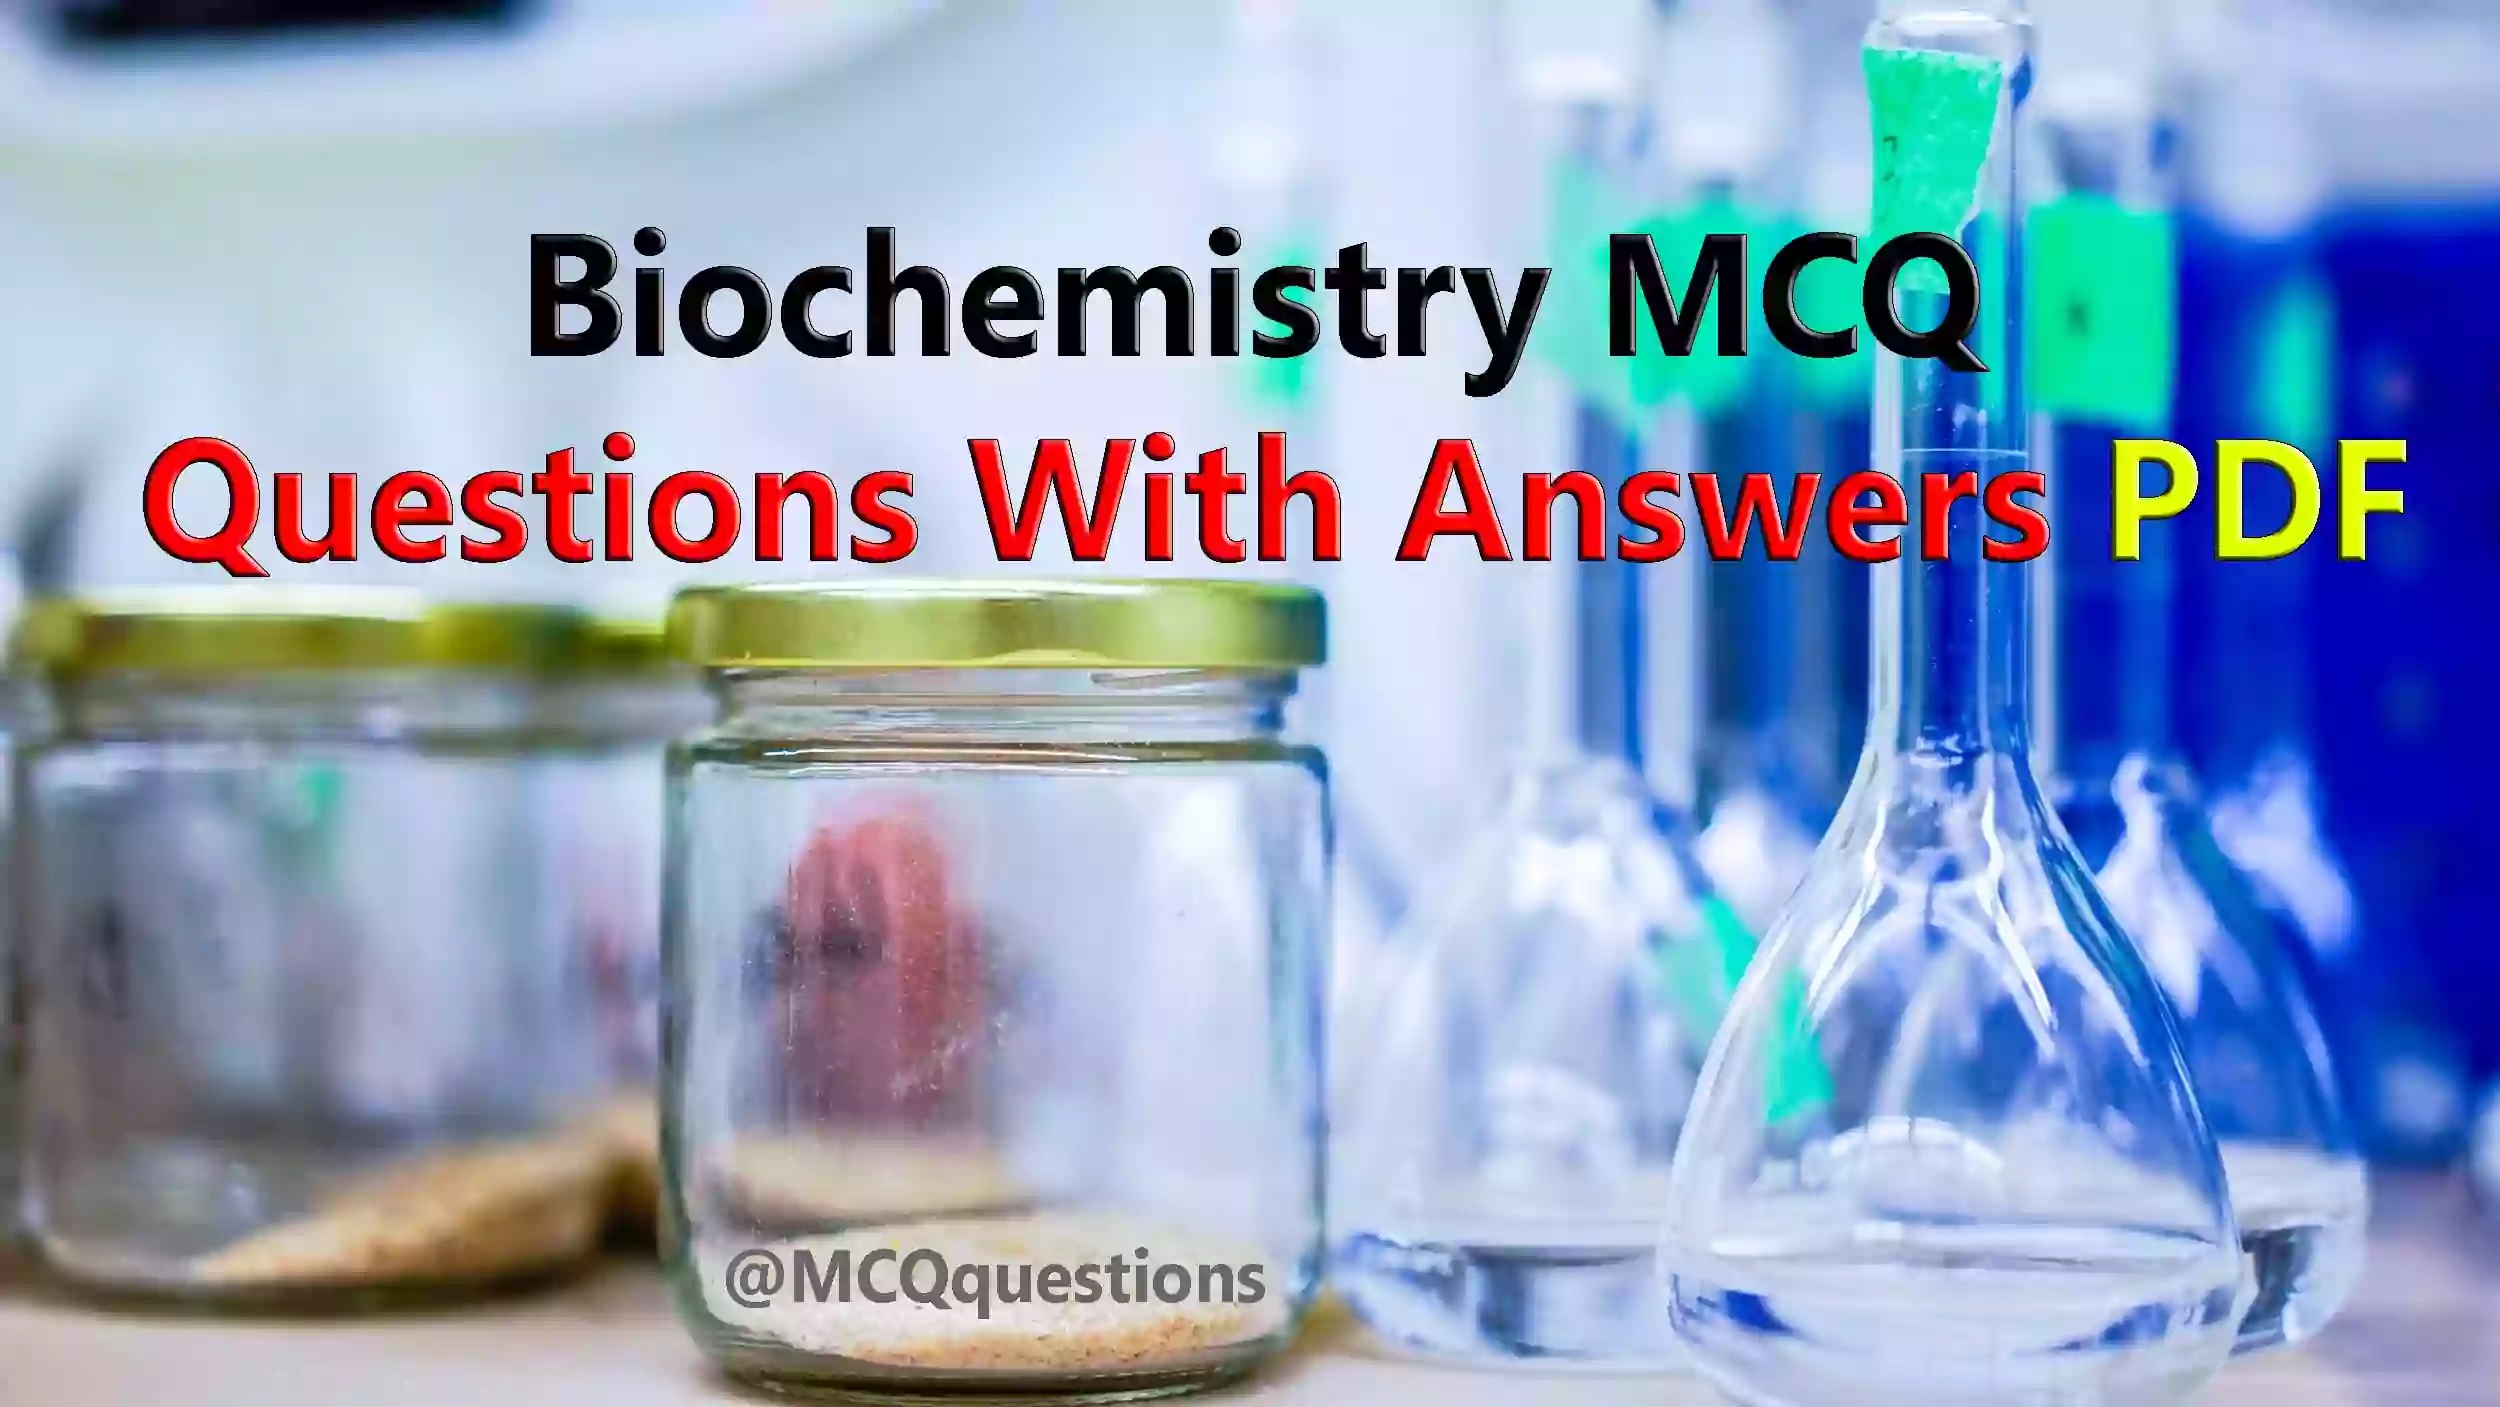 Biochemistry MCQ Questions With Answers PDF